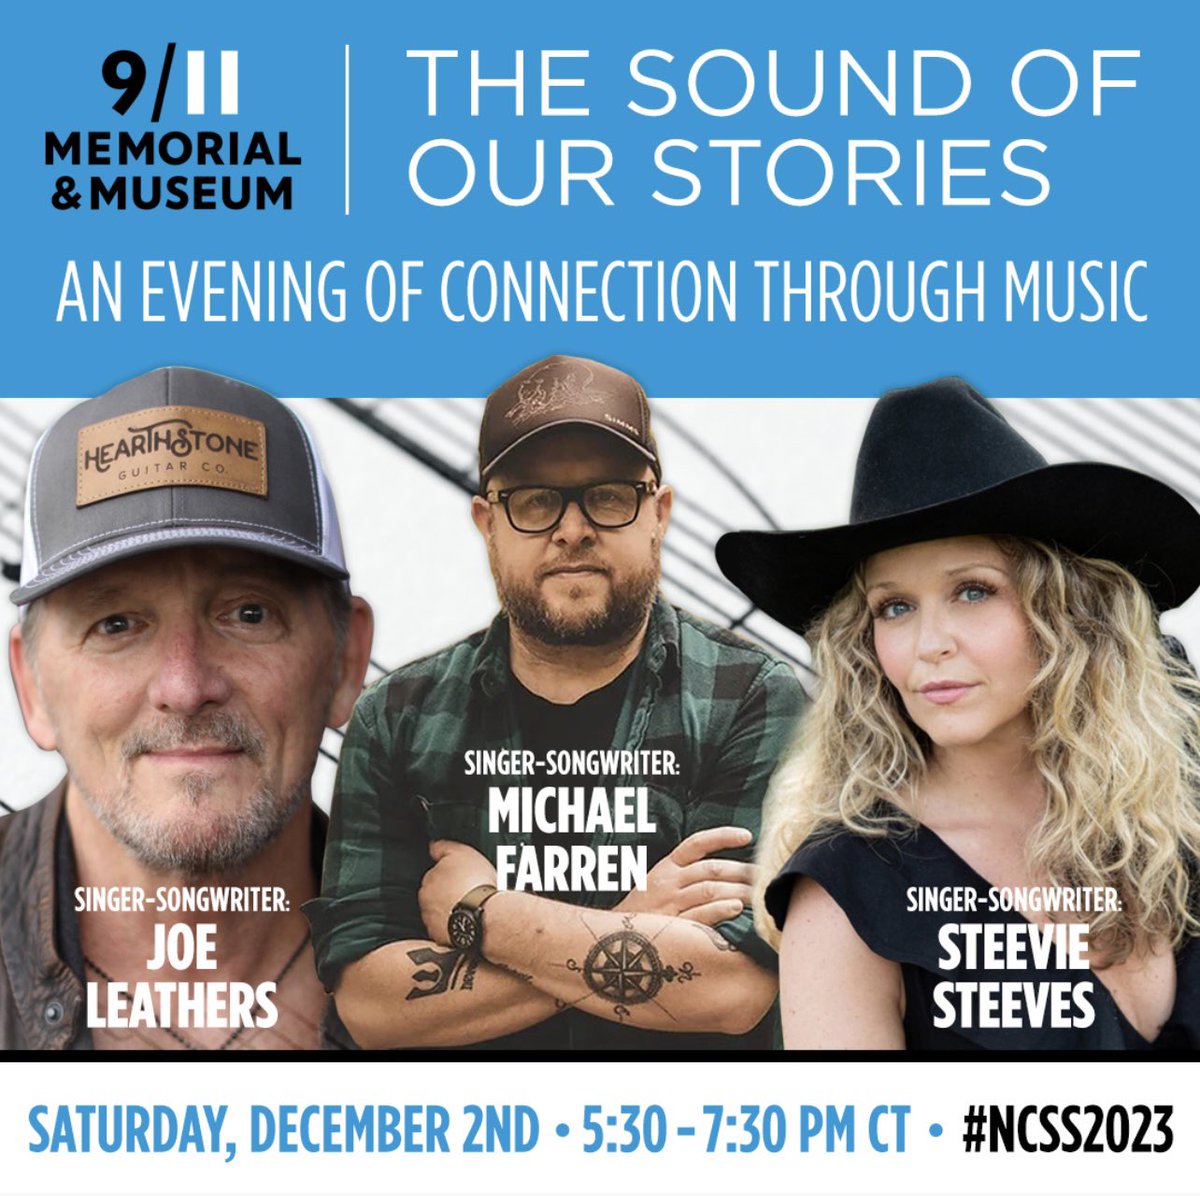 Don't miss Grammy-winning Nashville songwriters live at @Sept11Memorial 'Sound of Our Stories: An Evening of Connection through Music' on @NCSSNetwork on Saturday, December 2, 5:30 p.m.